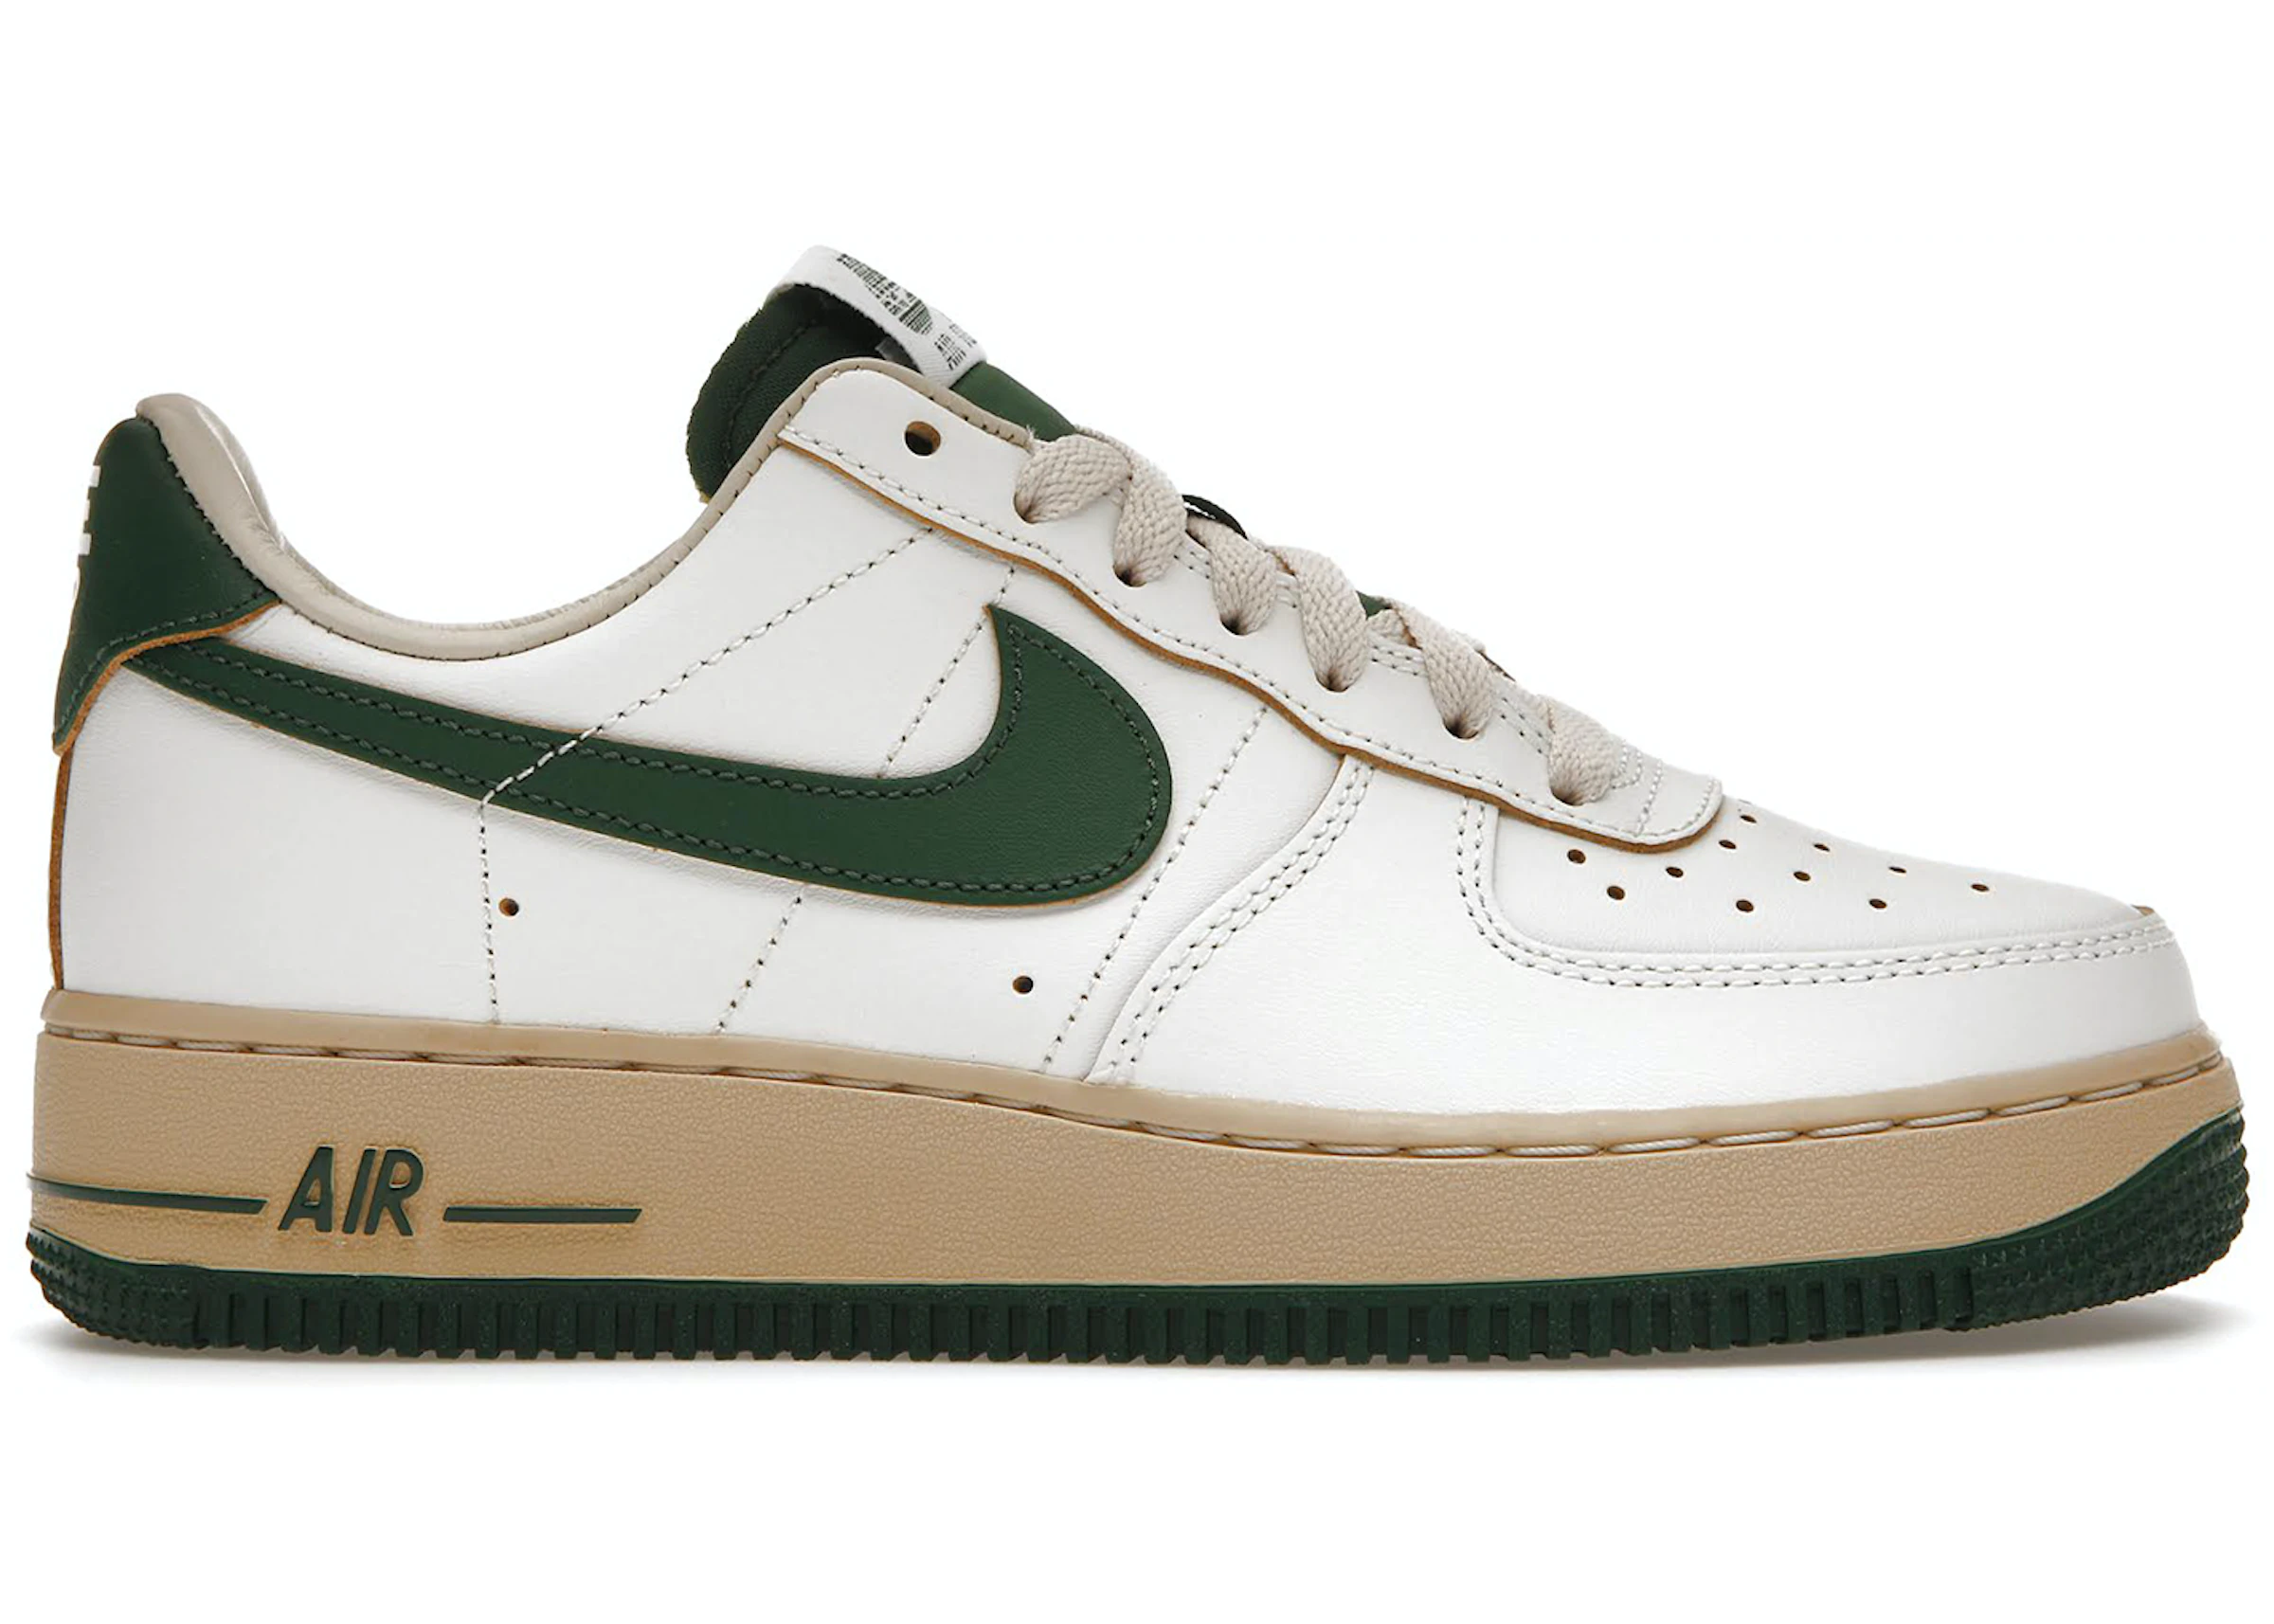 Nike Air Force 1 Low Vintage Gorge Green (Women's) - US